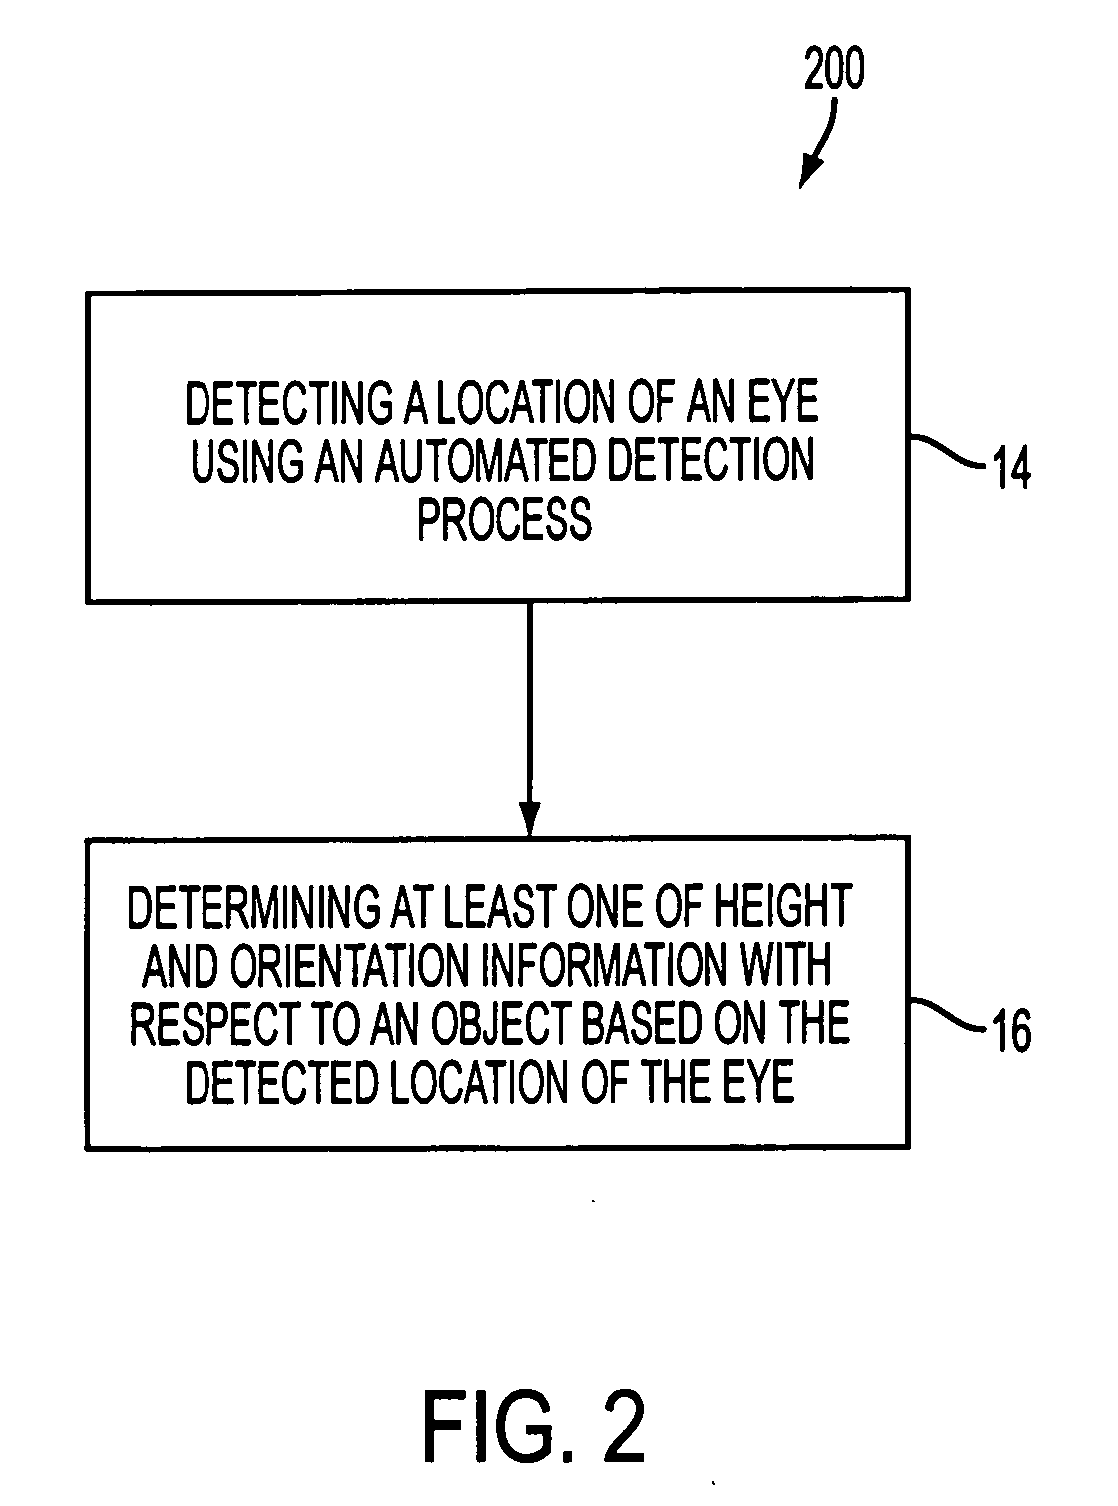 Detecting an eye of a user and determining location and blinking state of the user